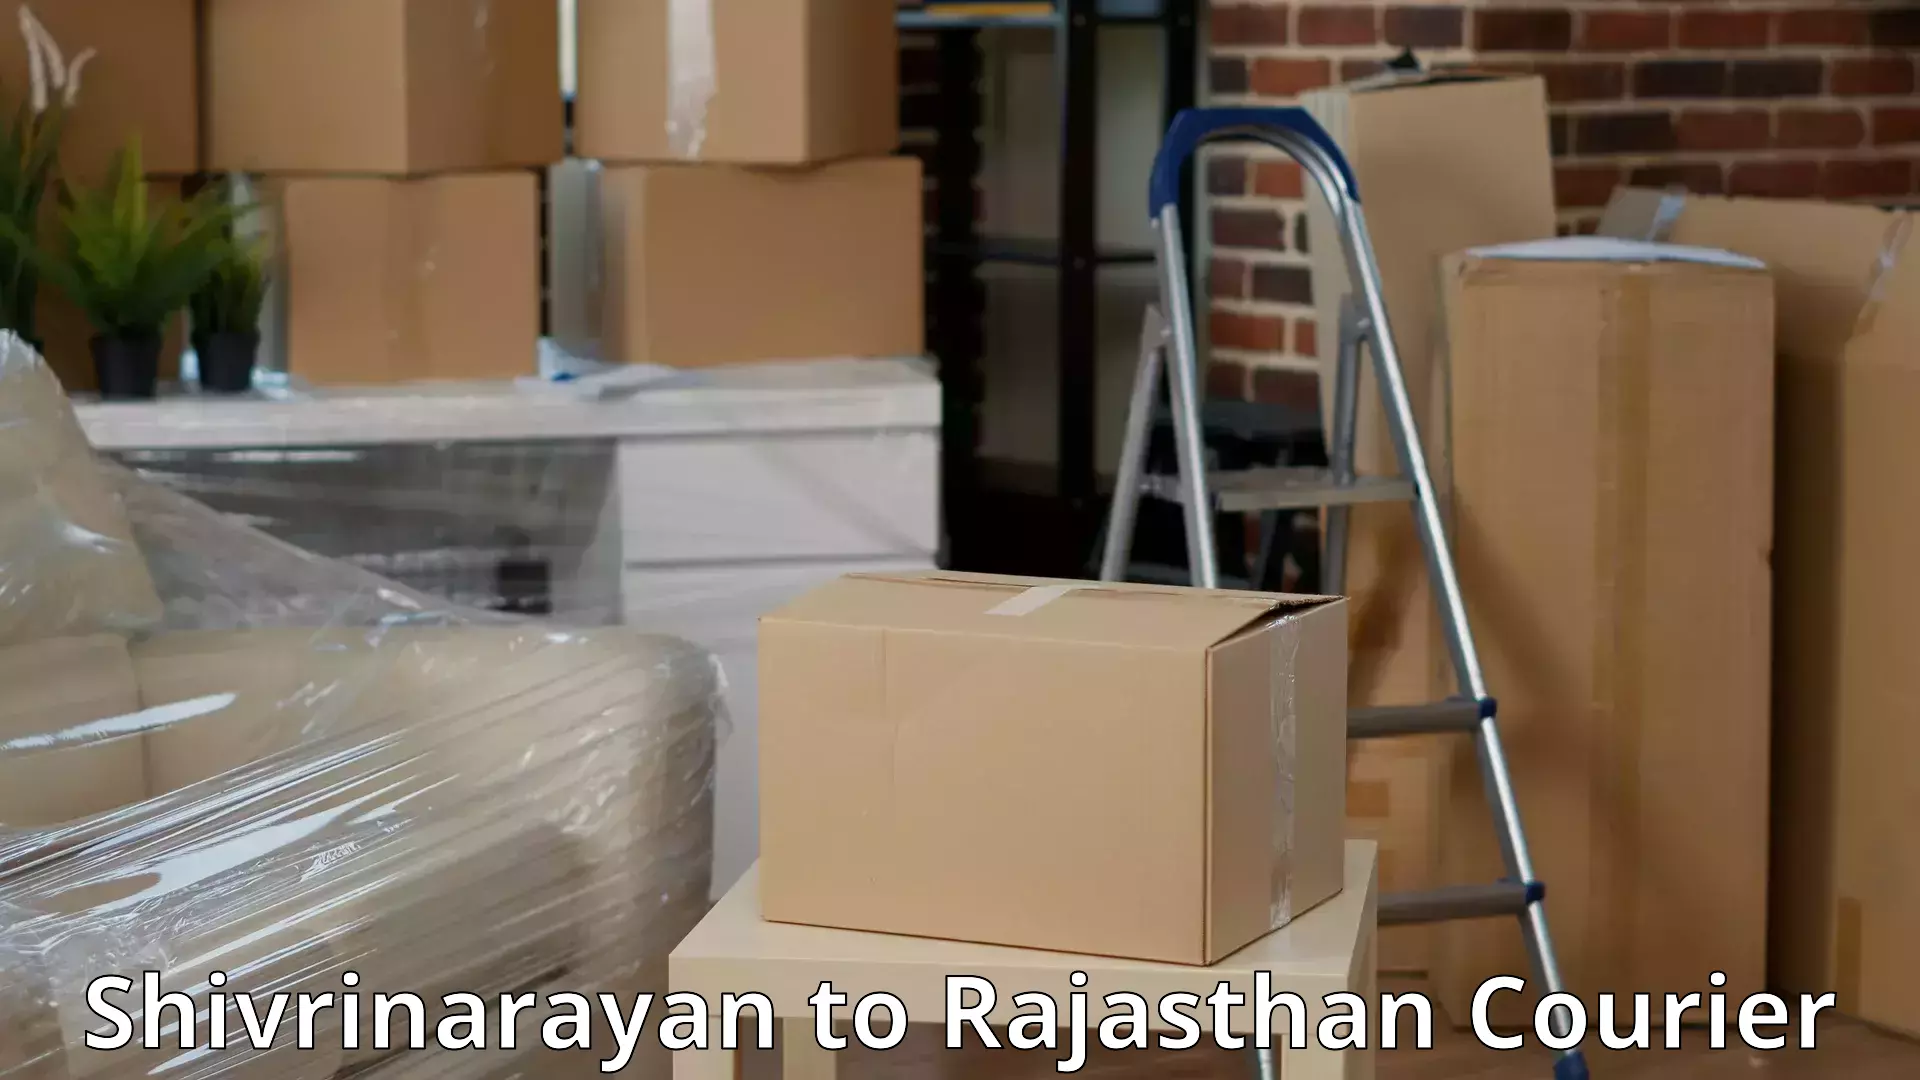 Trusted relocation services Shivrinarayan to Paota